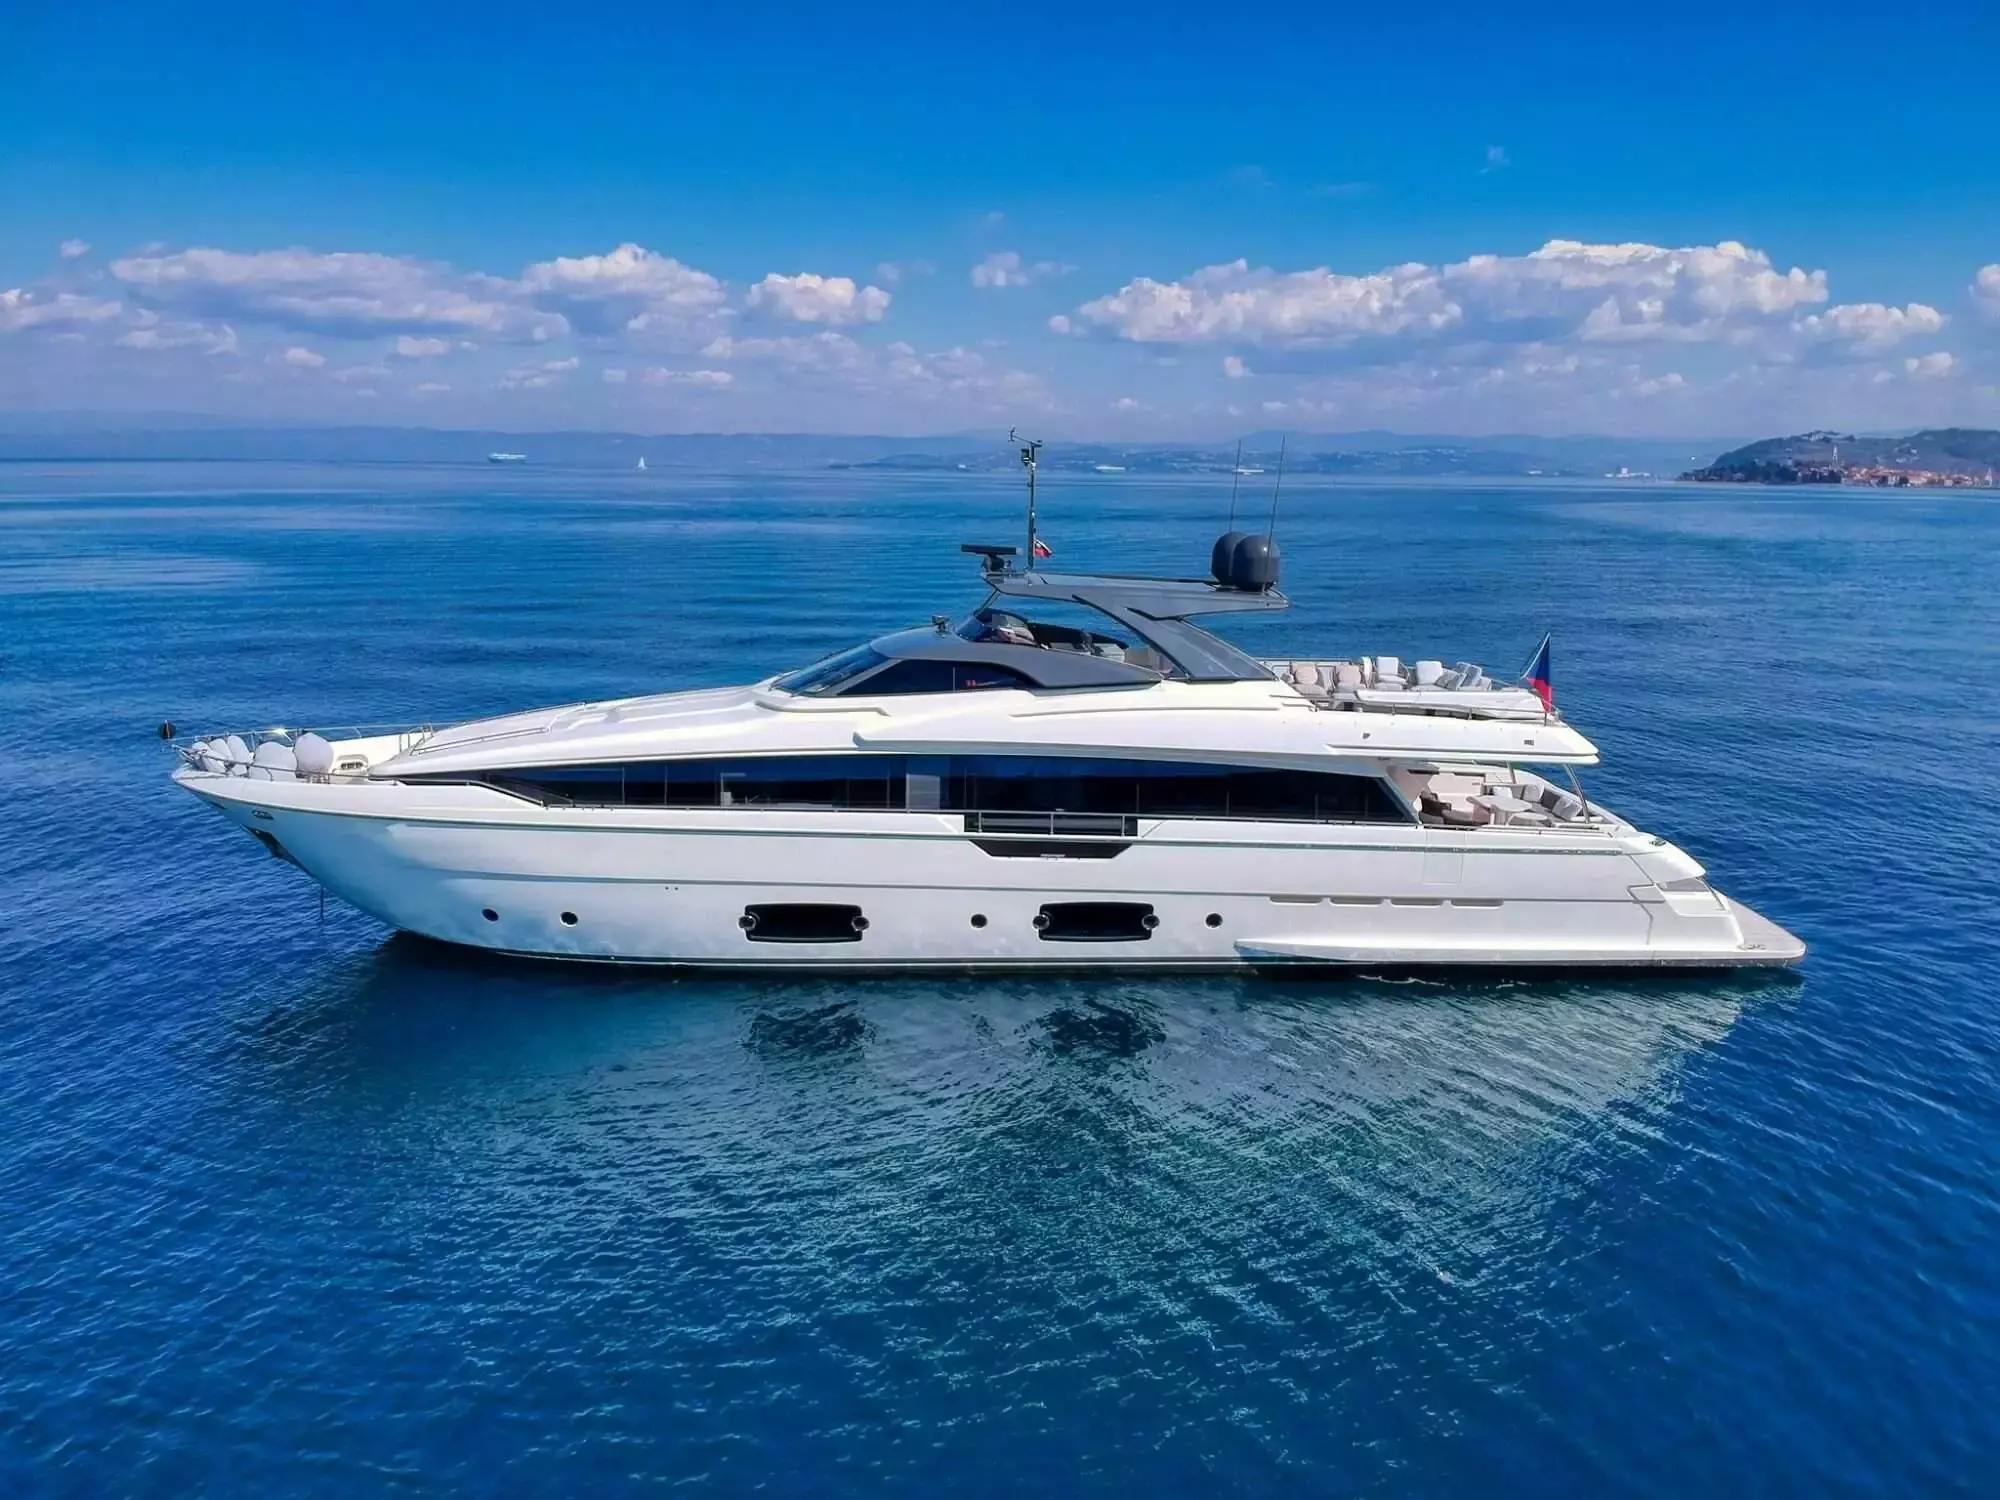 Damari by Ferretti - Top rates for a Charter of a private Superyacht in Italy